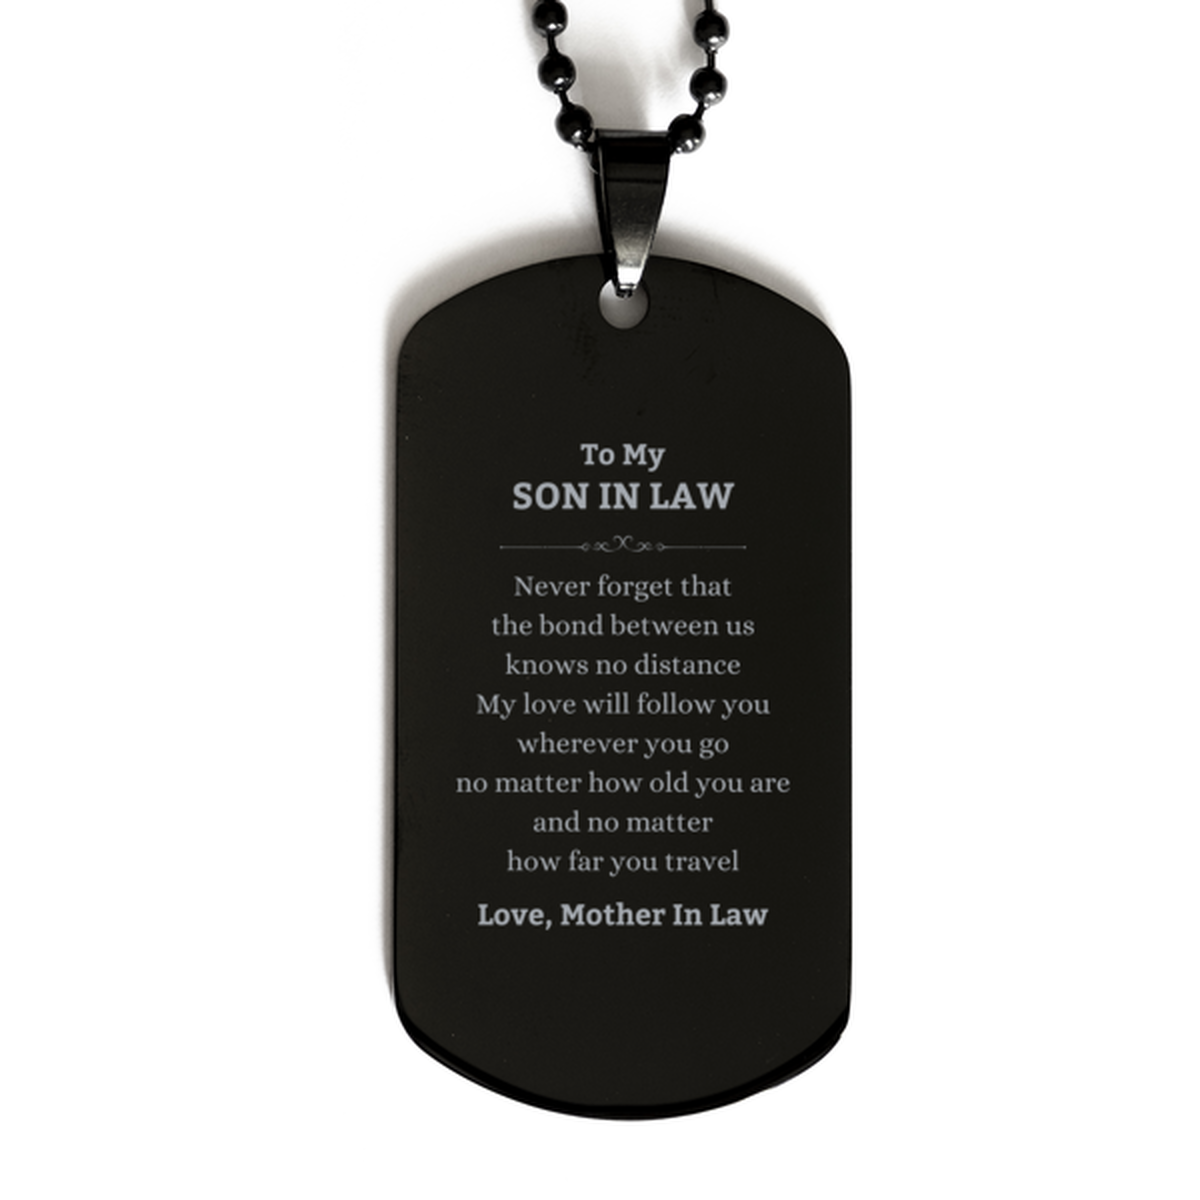 Son In Law Birthday Gifts from Mother In Law, Adjustable Black Dog Tag for Son In Law Christmas Graduation Unique Gifts Son In Law Never forget that the bond between us knows no distance. Love, Mother In Law